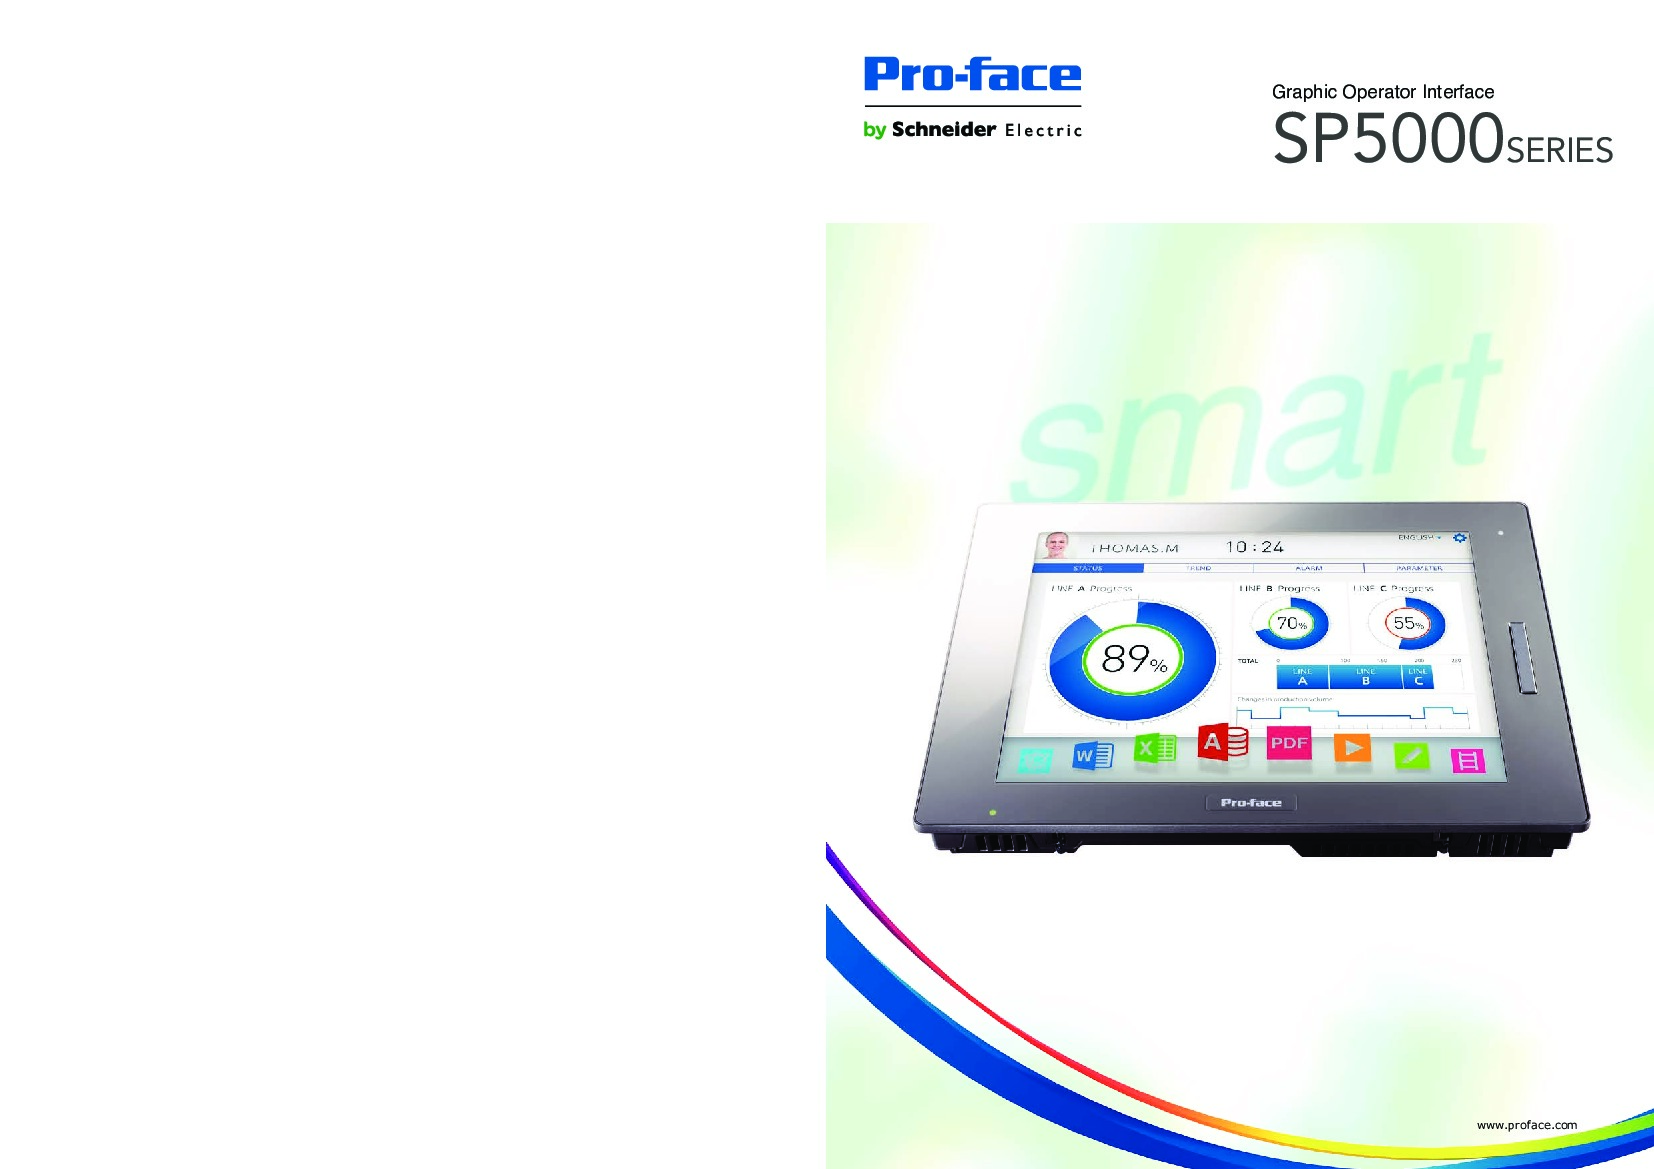 First Page Image of PFXSP5800WCD Pro-face SP5000 Catalog.pdf